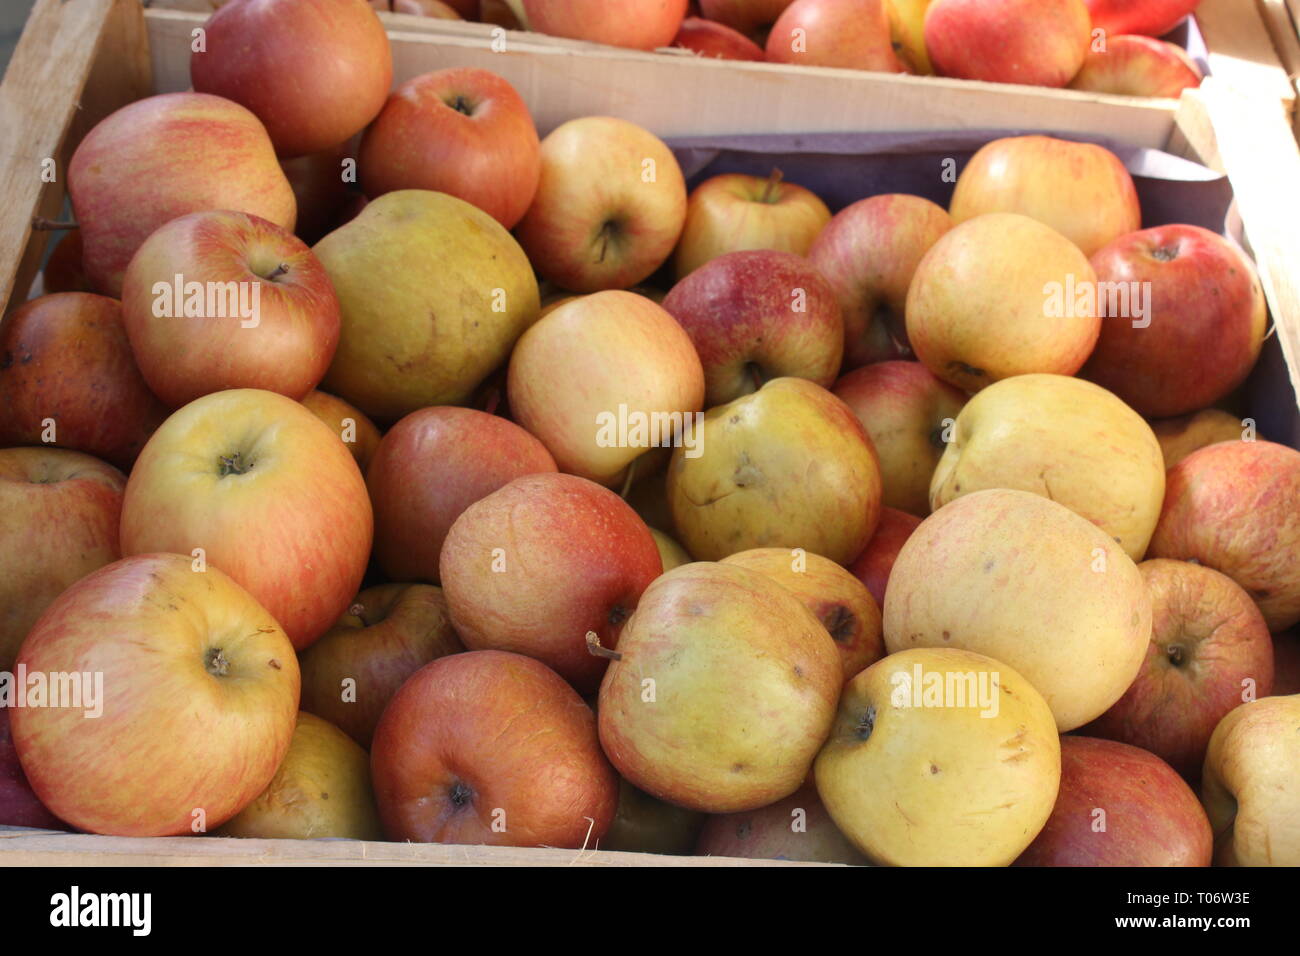 Close-up of Fuji apples. Authentic product in unsorted sizes with natural faults, fresh picked from tree. Stock Photo